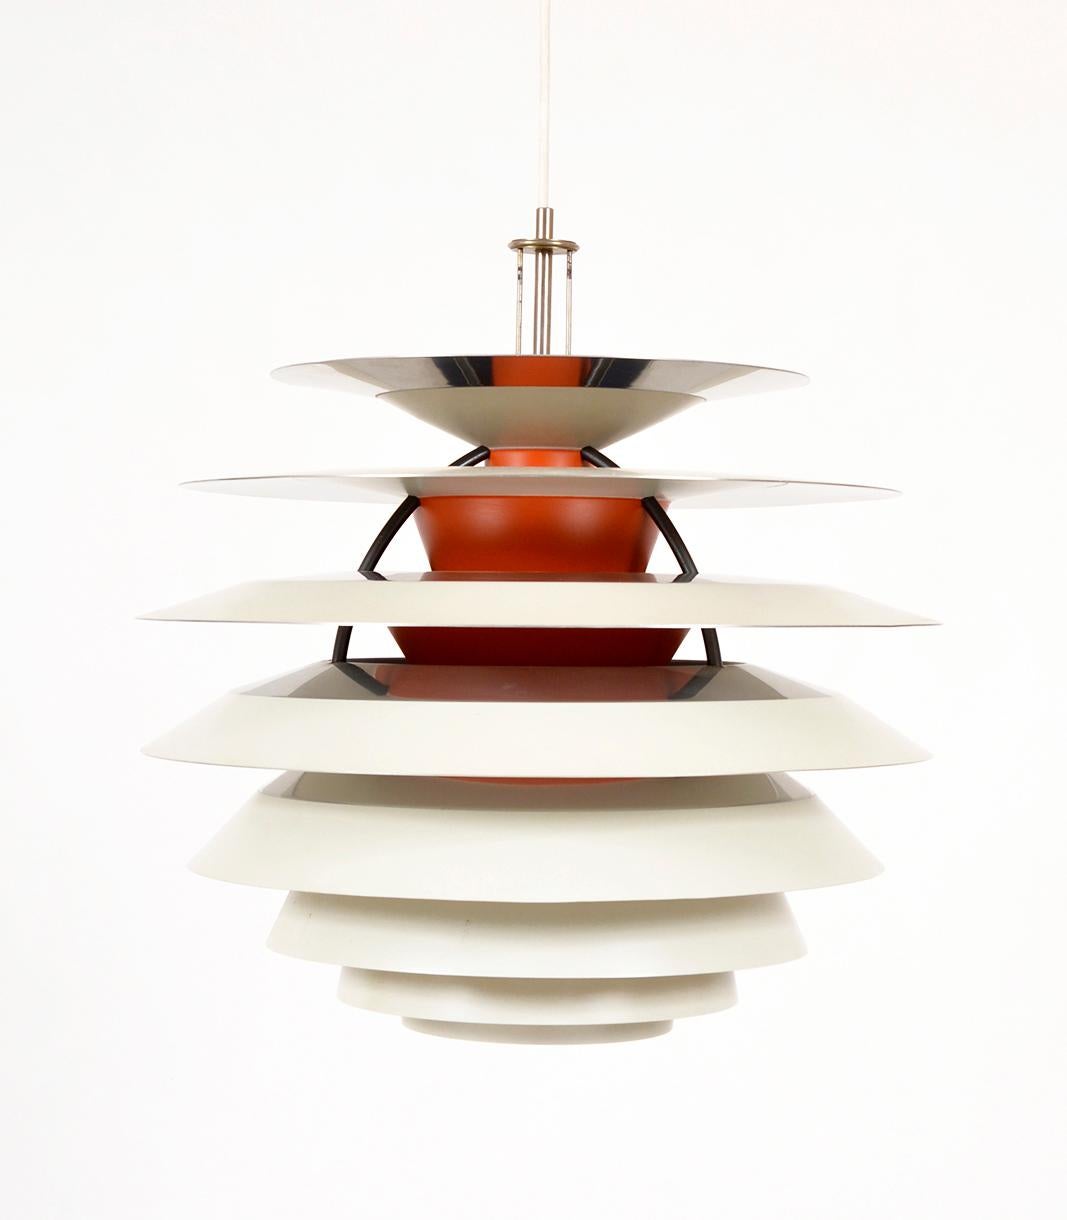 This iconic 1960s “Kontrast” pendant lamp was designed by Poul Henningsen for Louis Poulsen. Henningsen began his collaboration with Copenhagen-based lighting company Louis Poulsen in 1925, and produced over one hundred lamps, all belonging to the